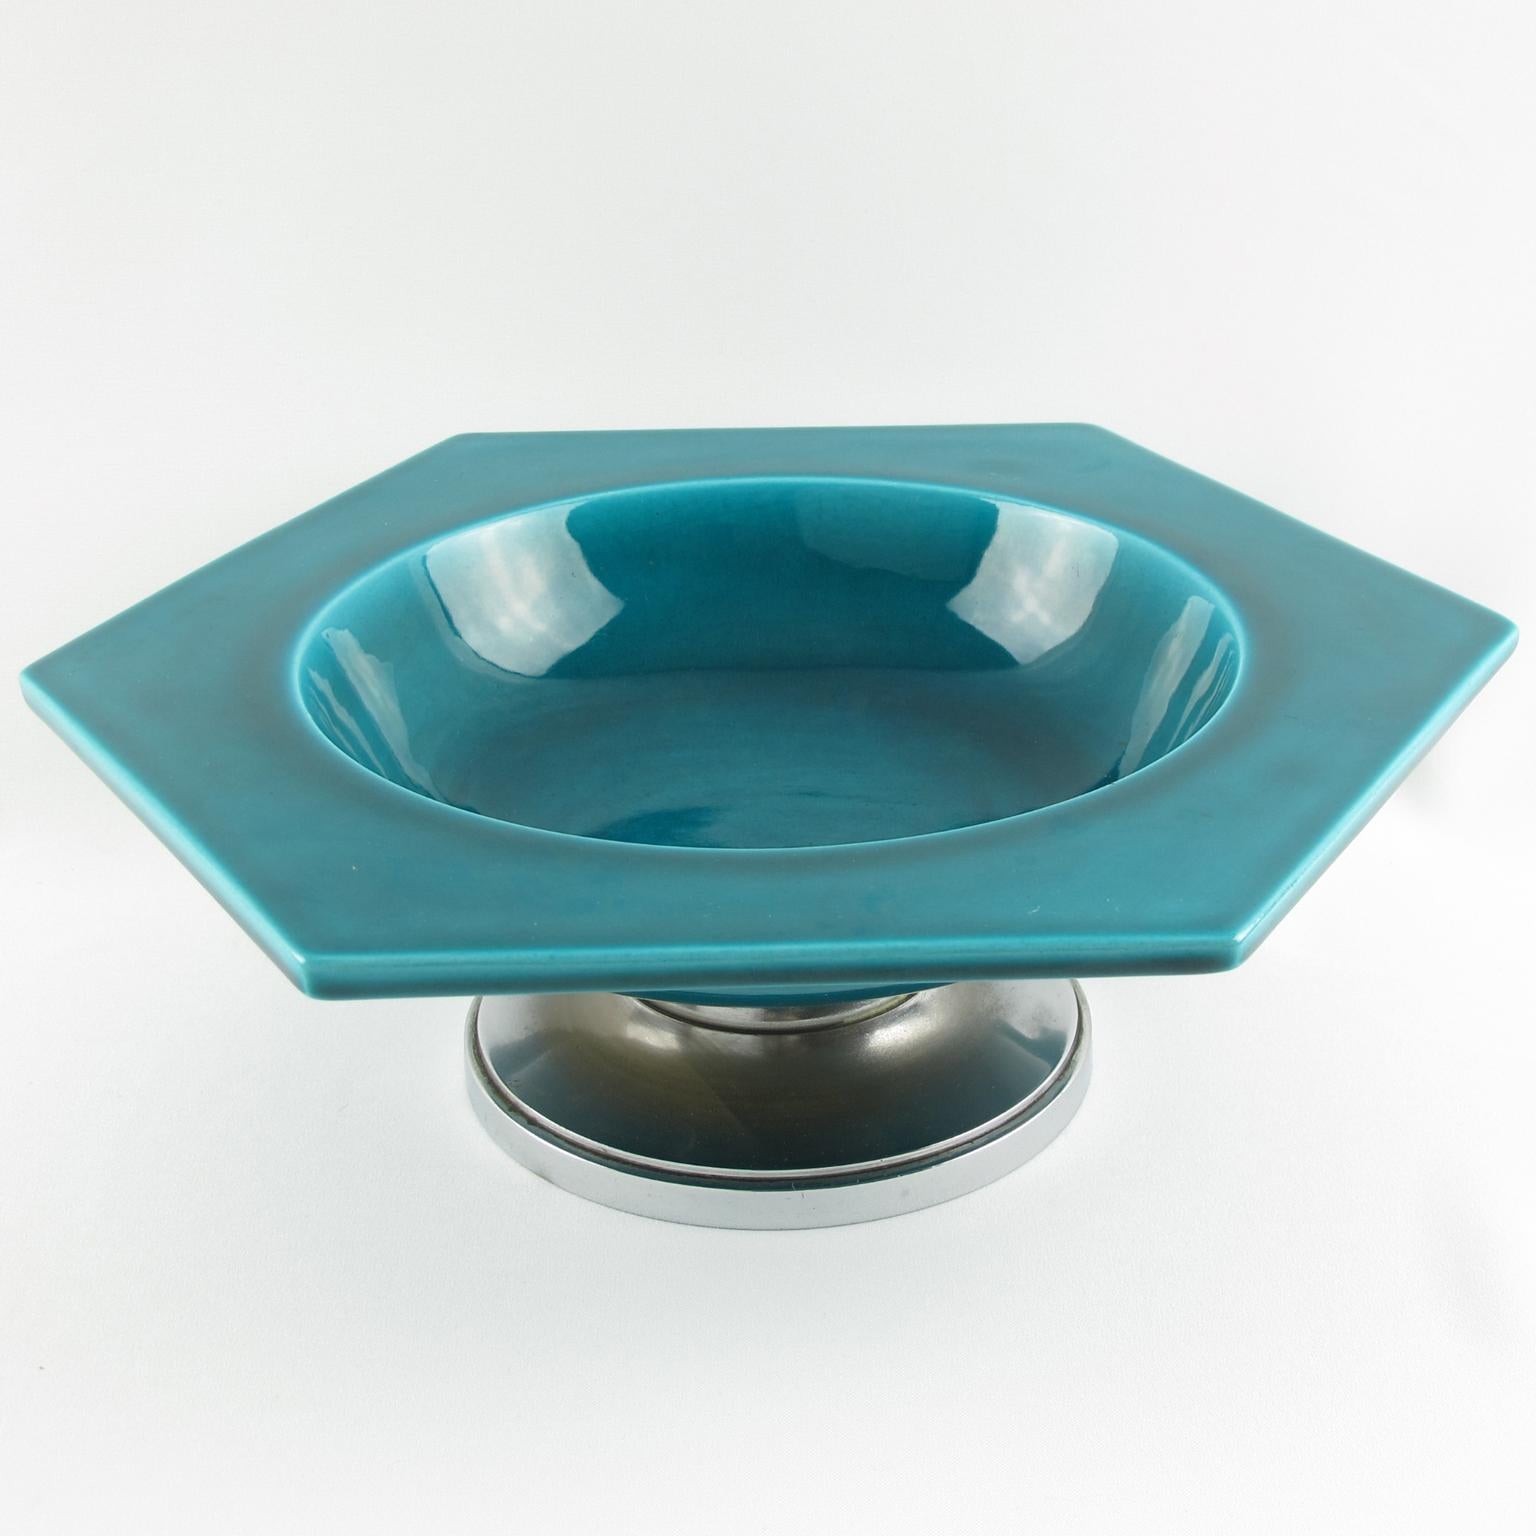 Striking French Art Deco modernist ceramic decorative bowl or centerpiece by Paul Milet (1870-1950) for Manufacture de Sevres, France. Geometric shape with turquoise glaze on a nickeled bronze pedestal base. Signed and marked PM and Sevres